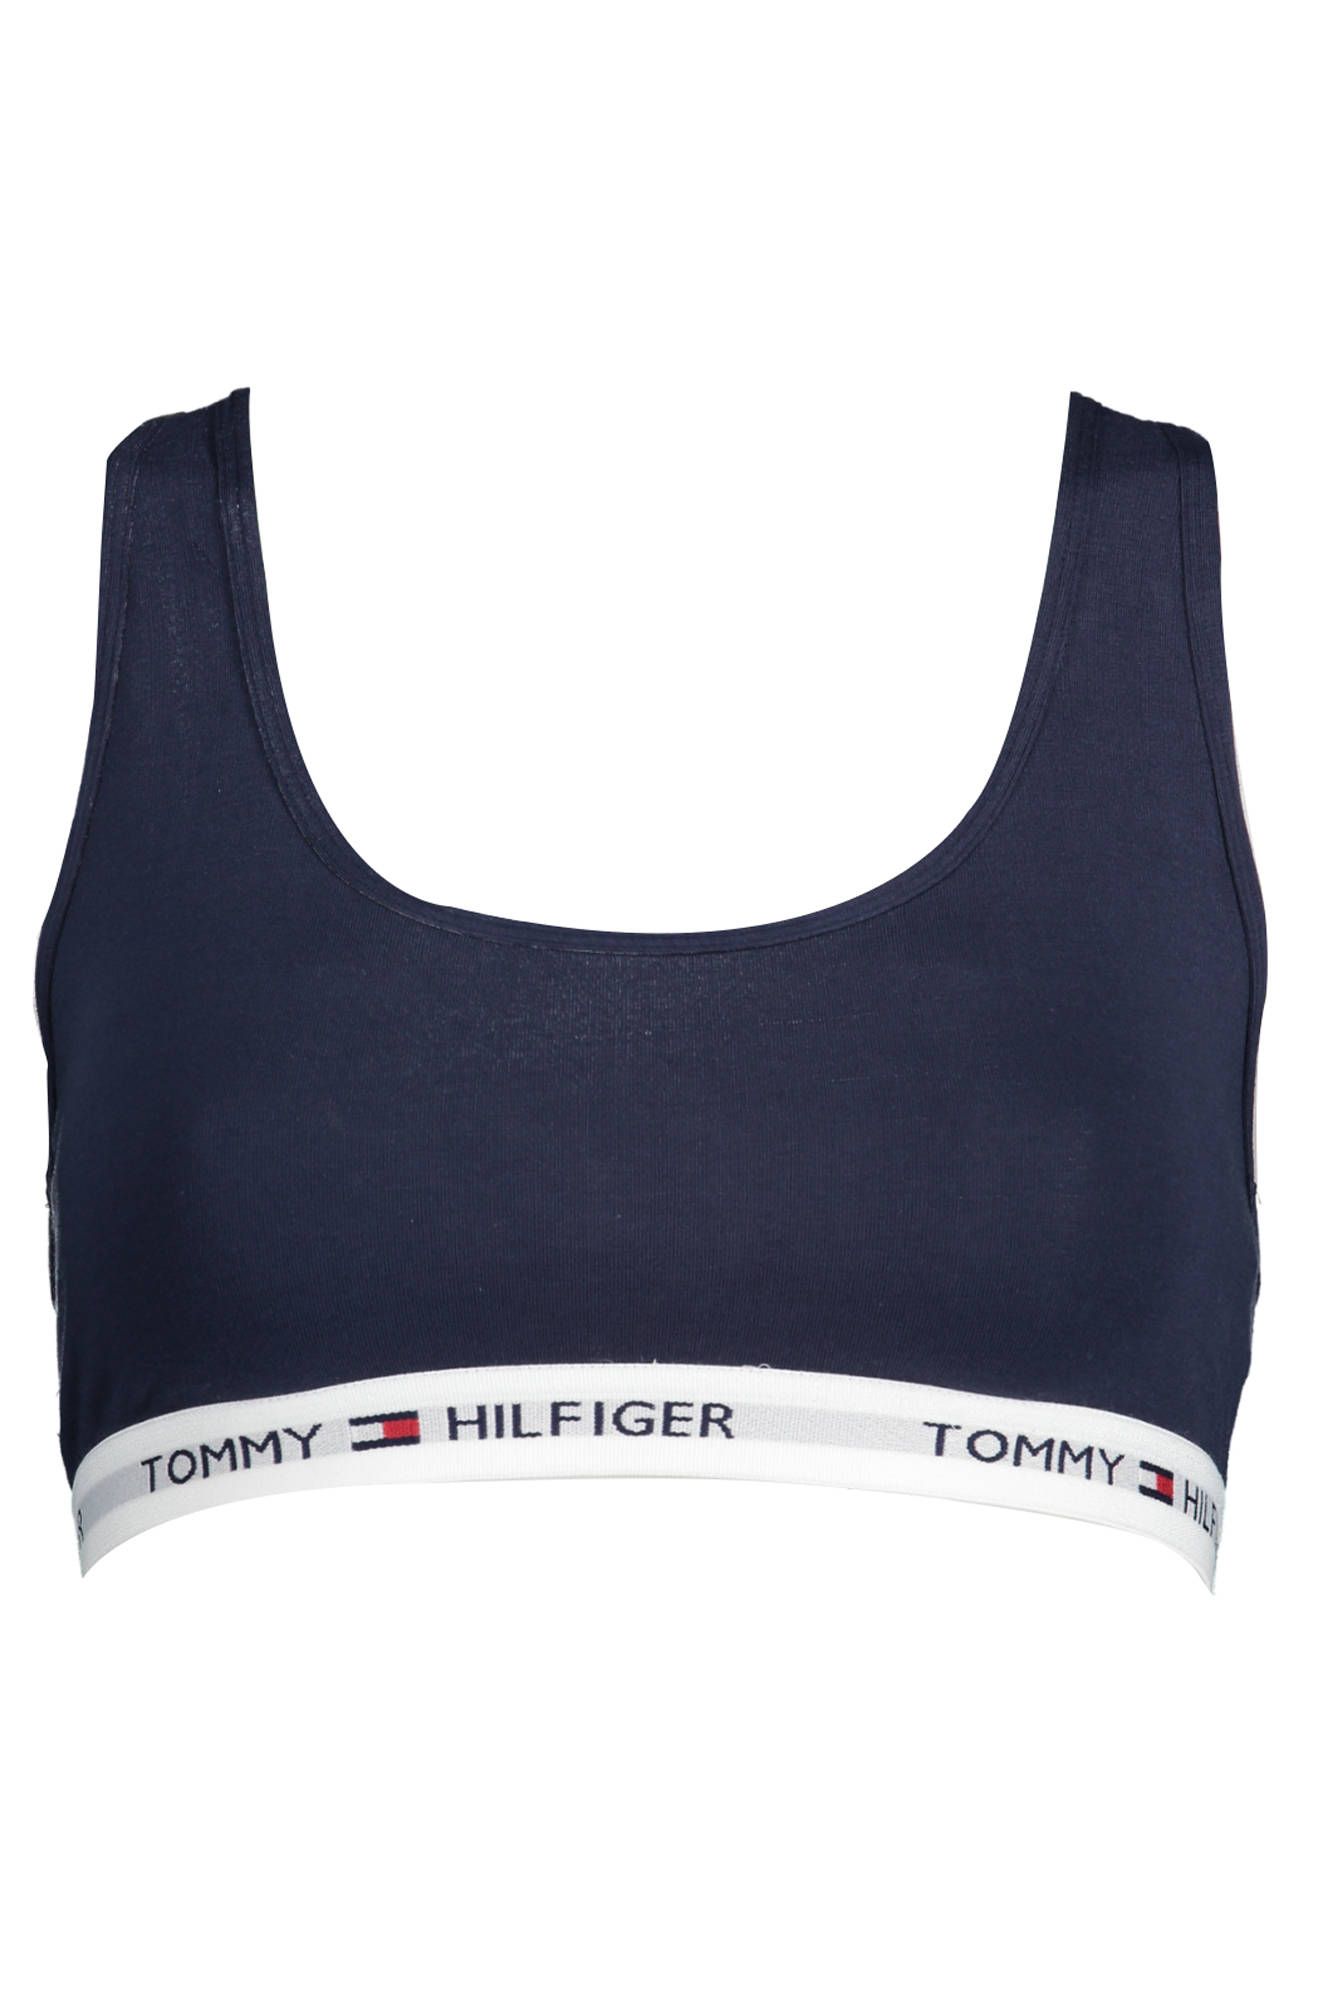 Chic Elastic Sports Bra with Contrasting Details